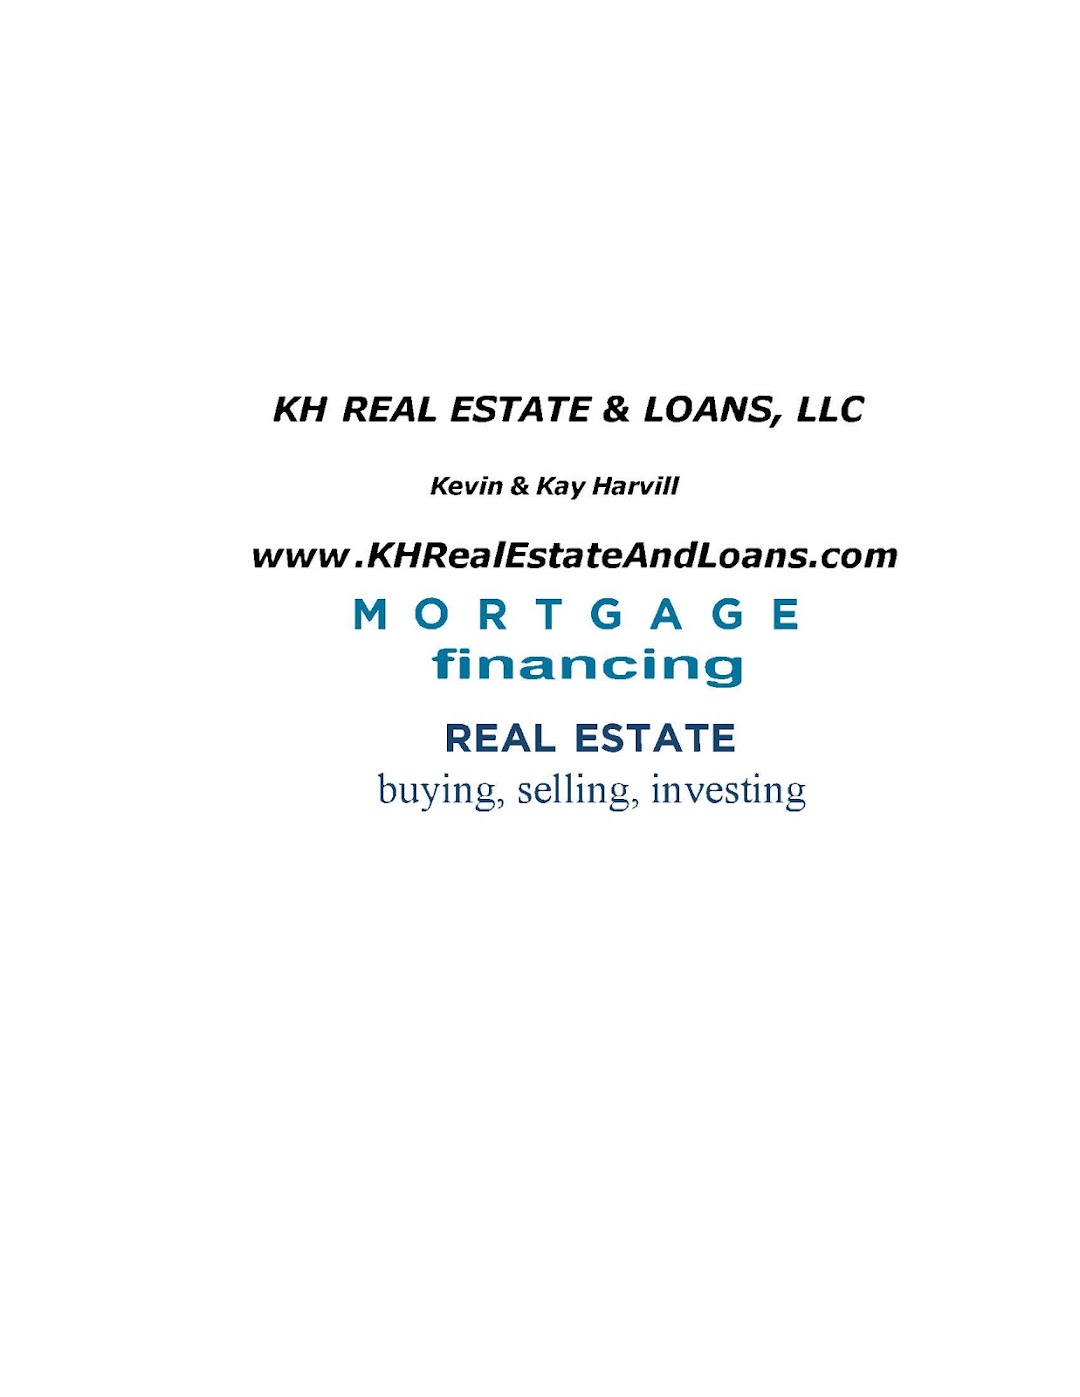 KH REAL ESTATE AND LOANS